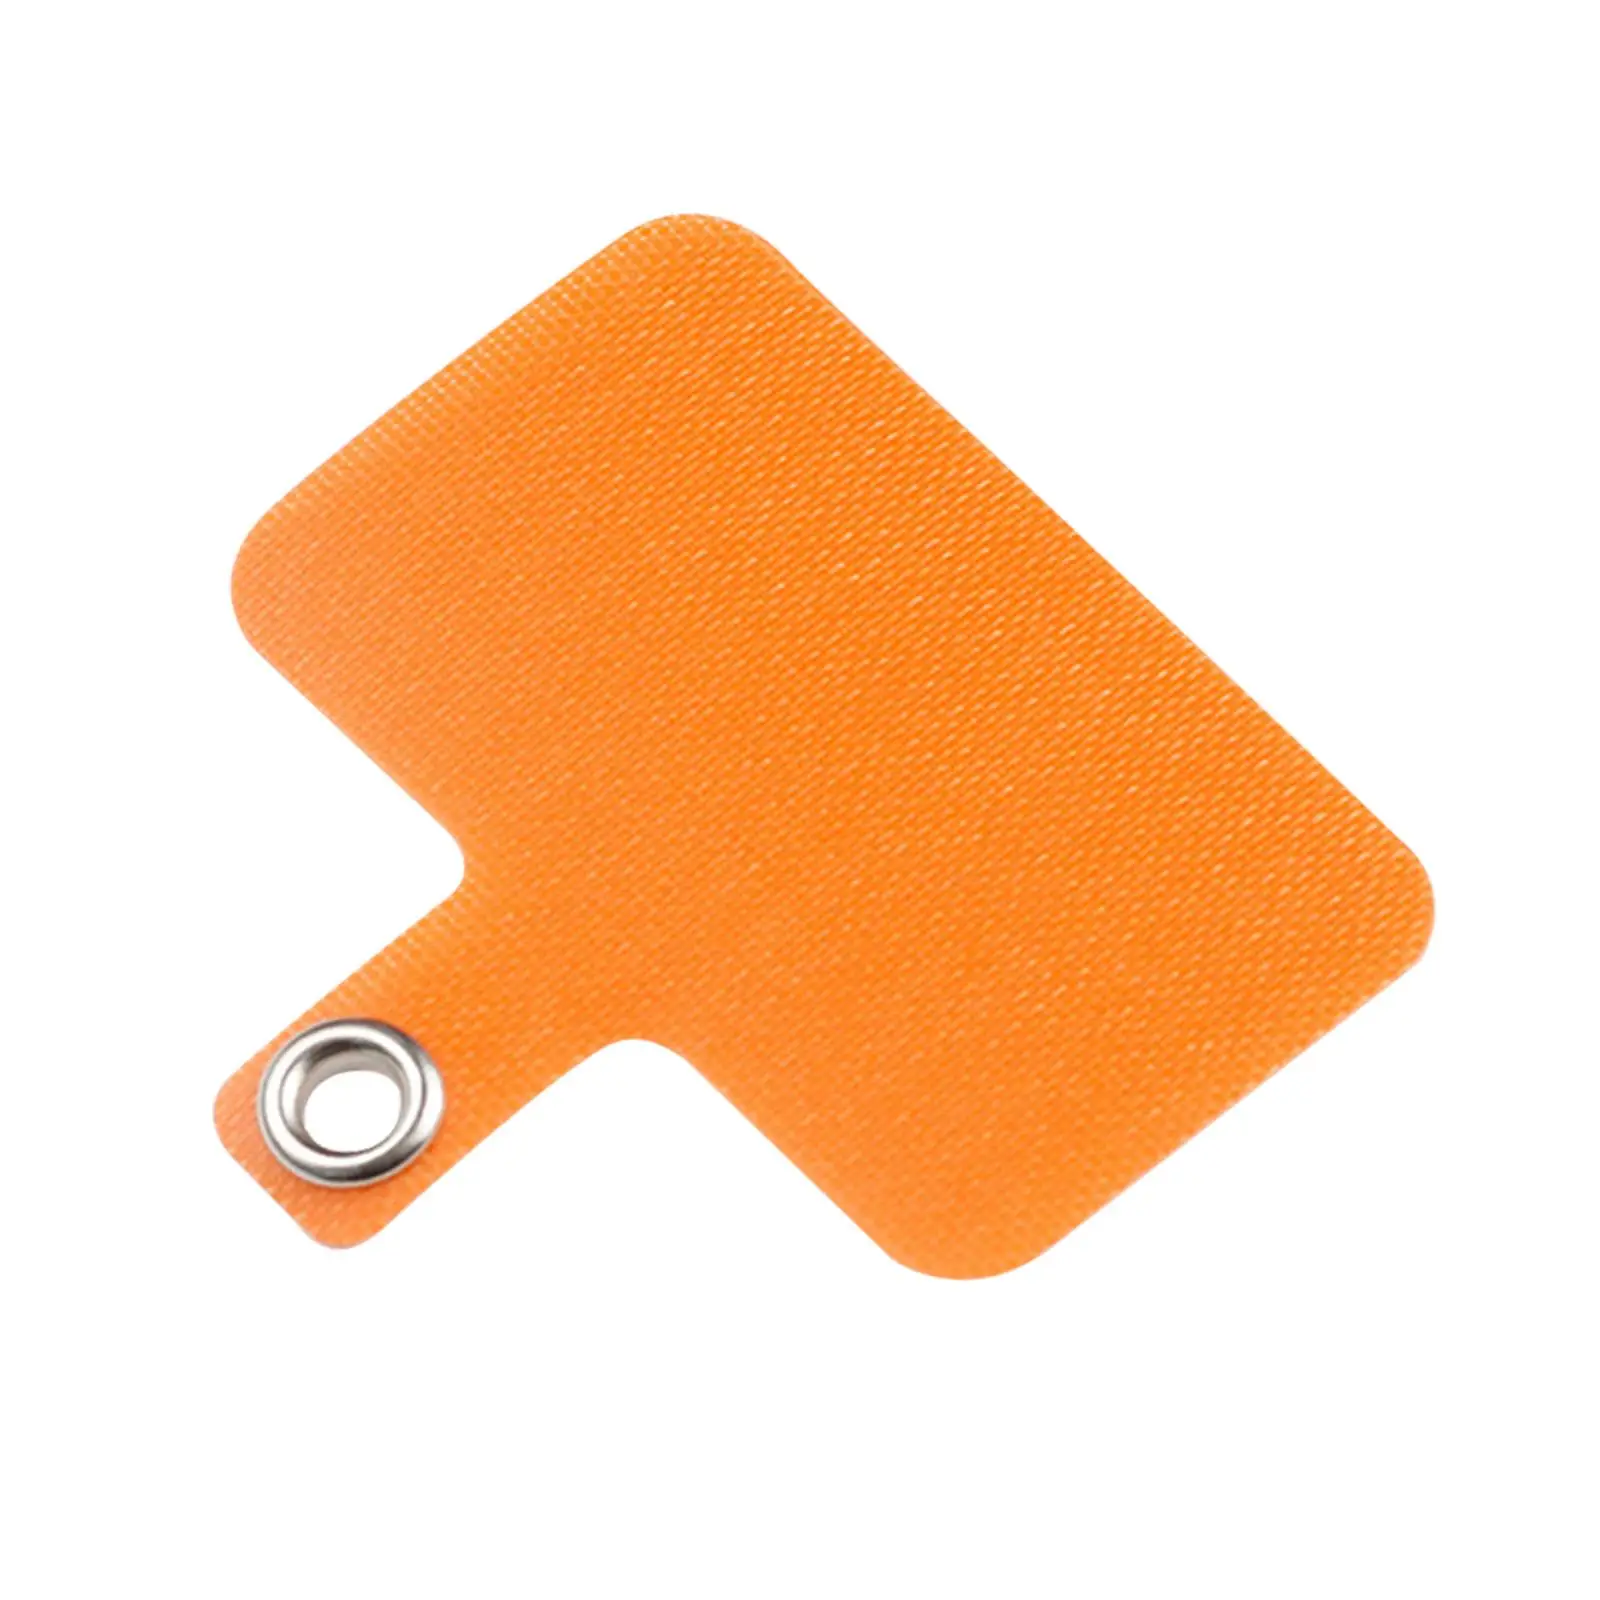 Phone Lanyard Gasket, Safety Tether Patch Drop Protection Anti Lost Neck Cord Patch